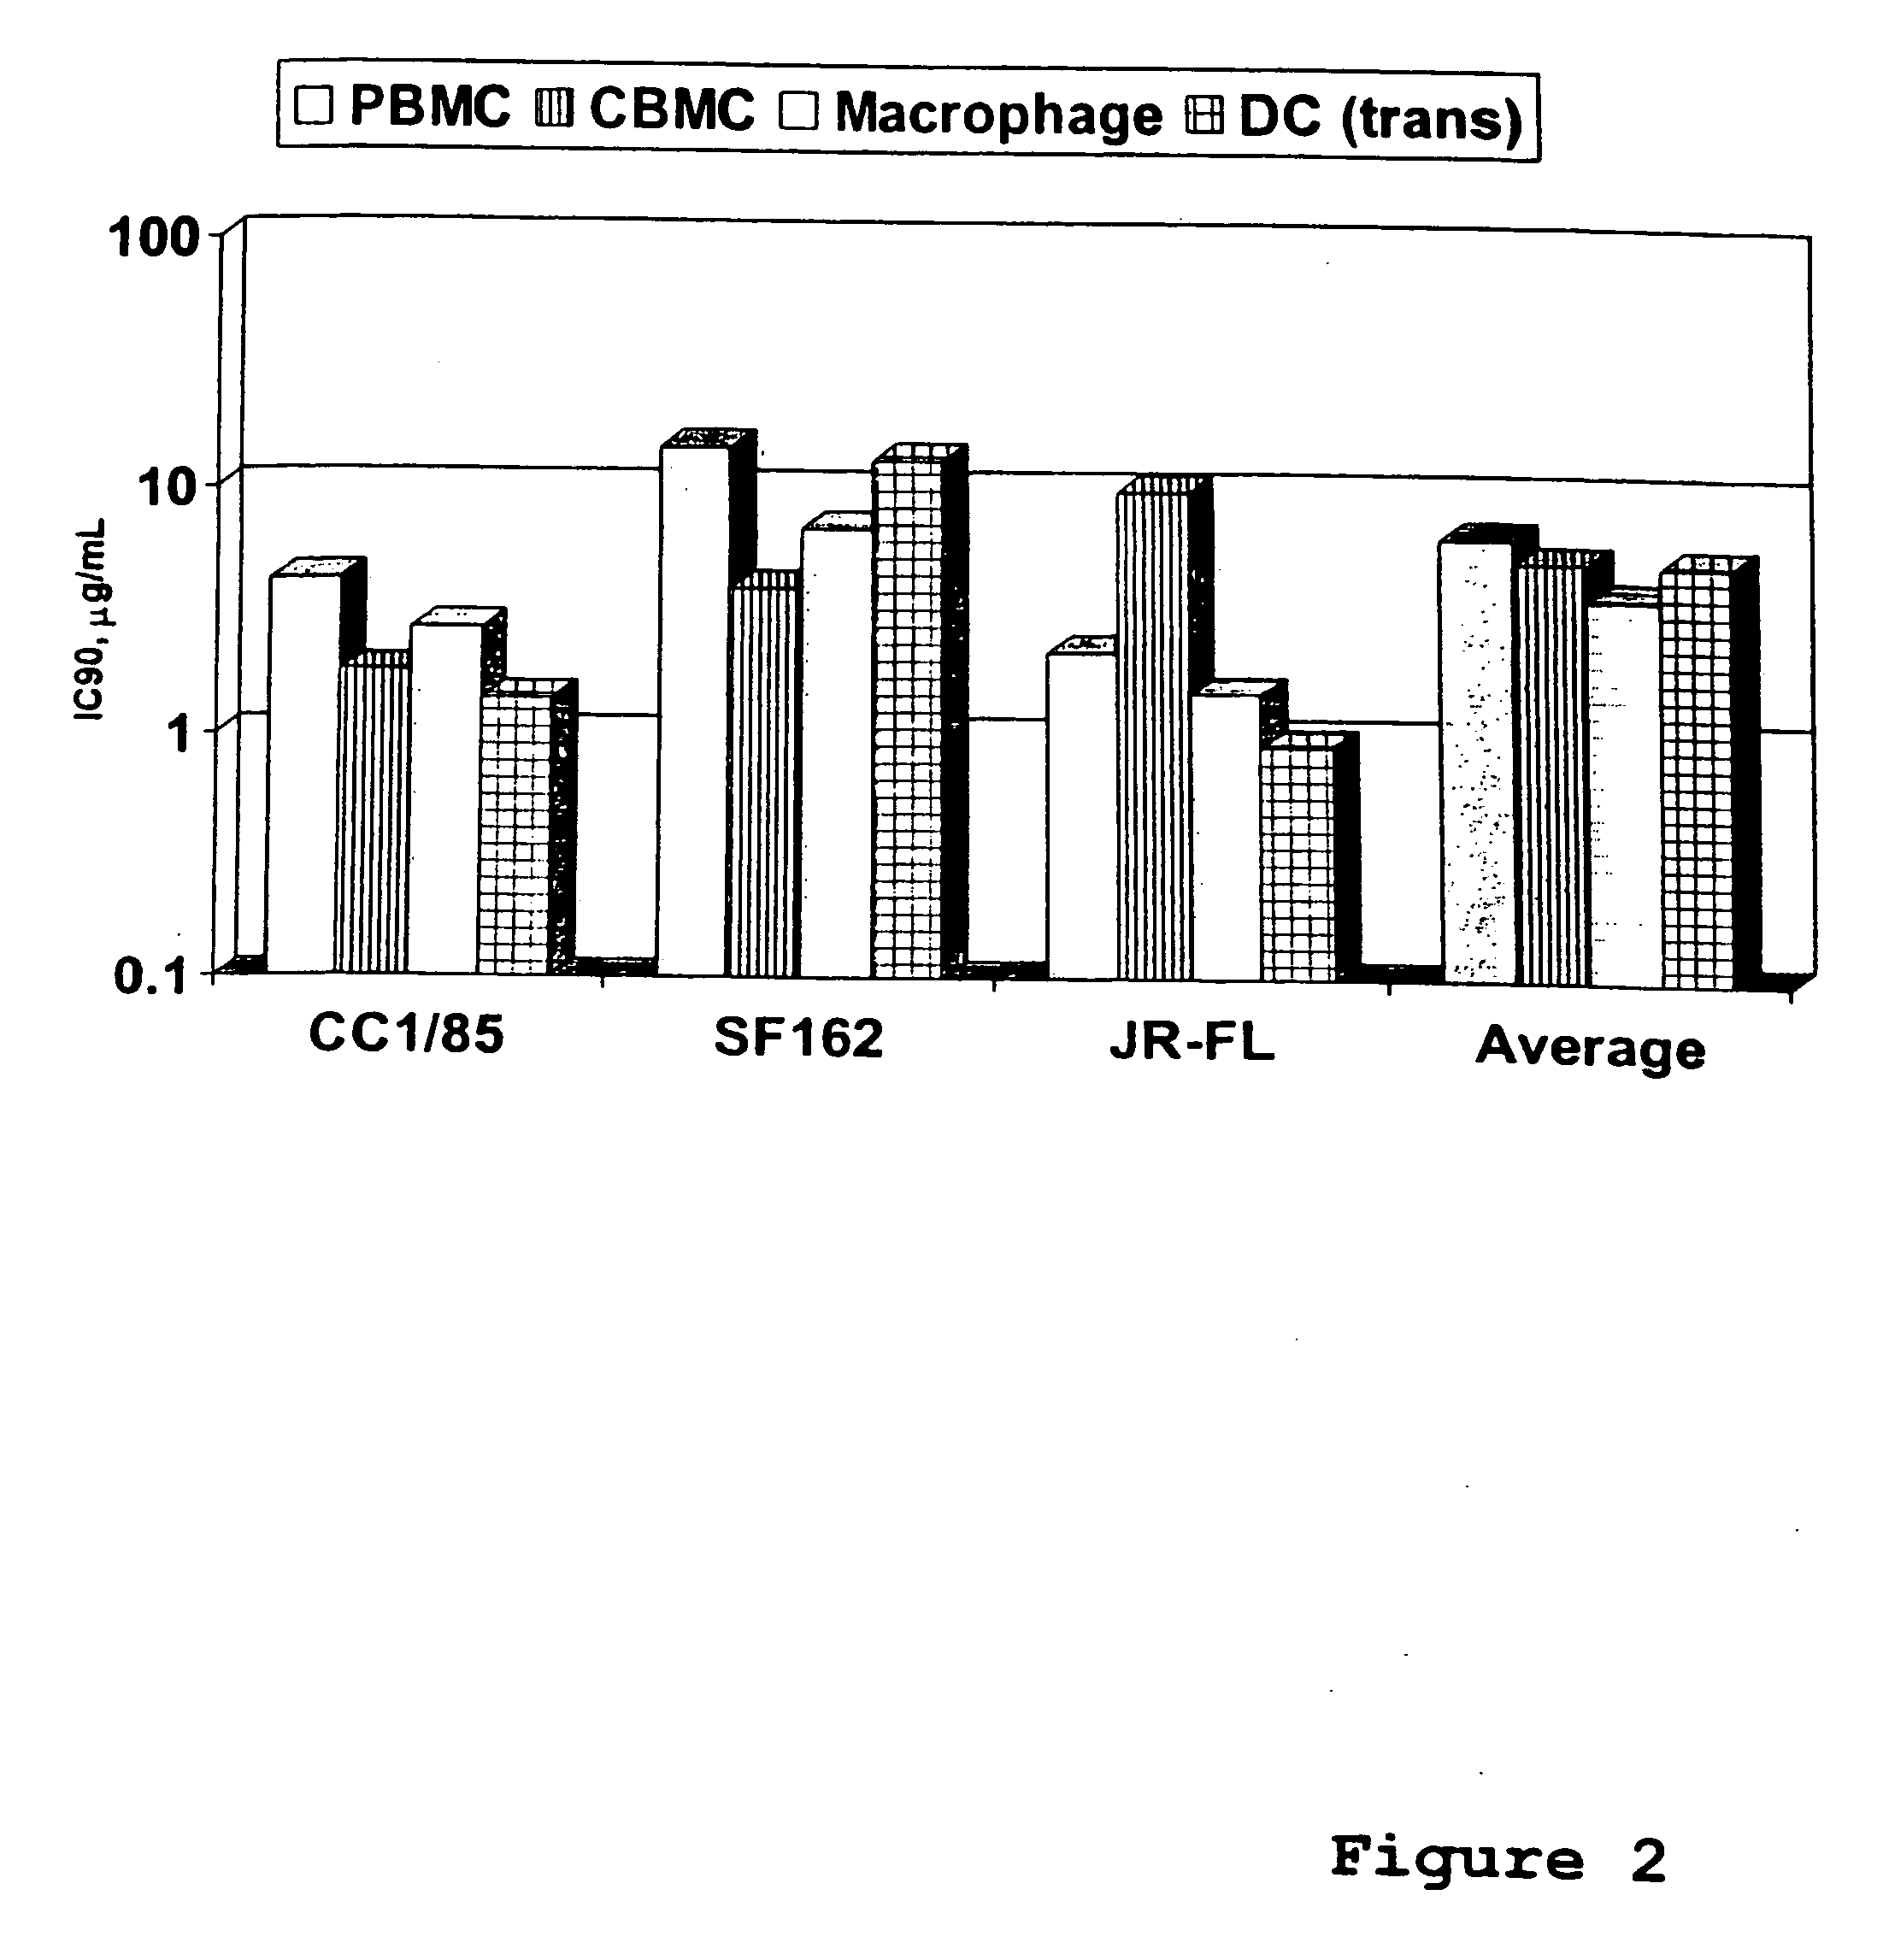 Methods for reducing viral load in HIV-1-infected patients